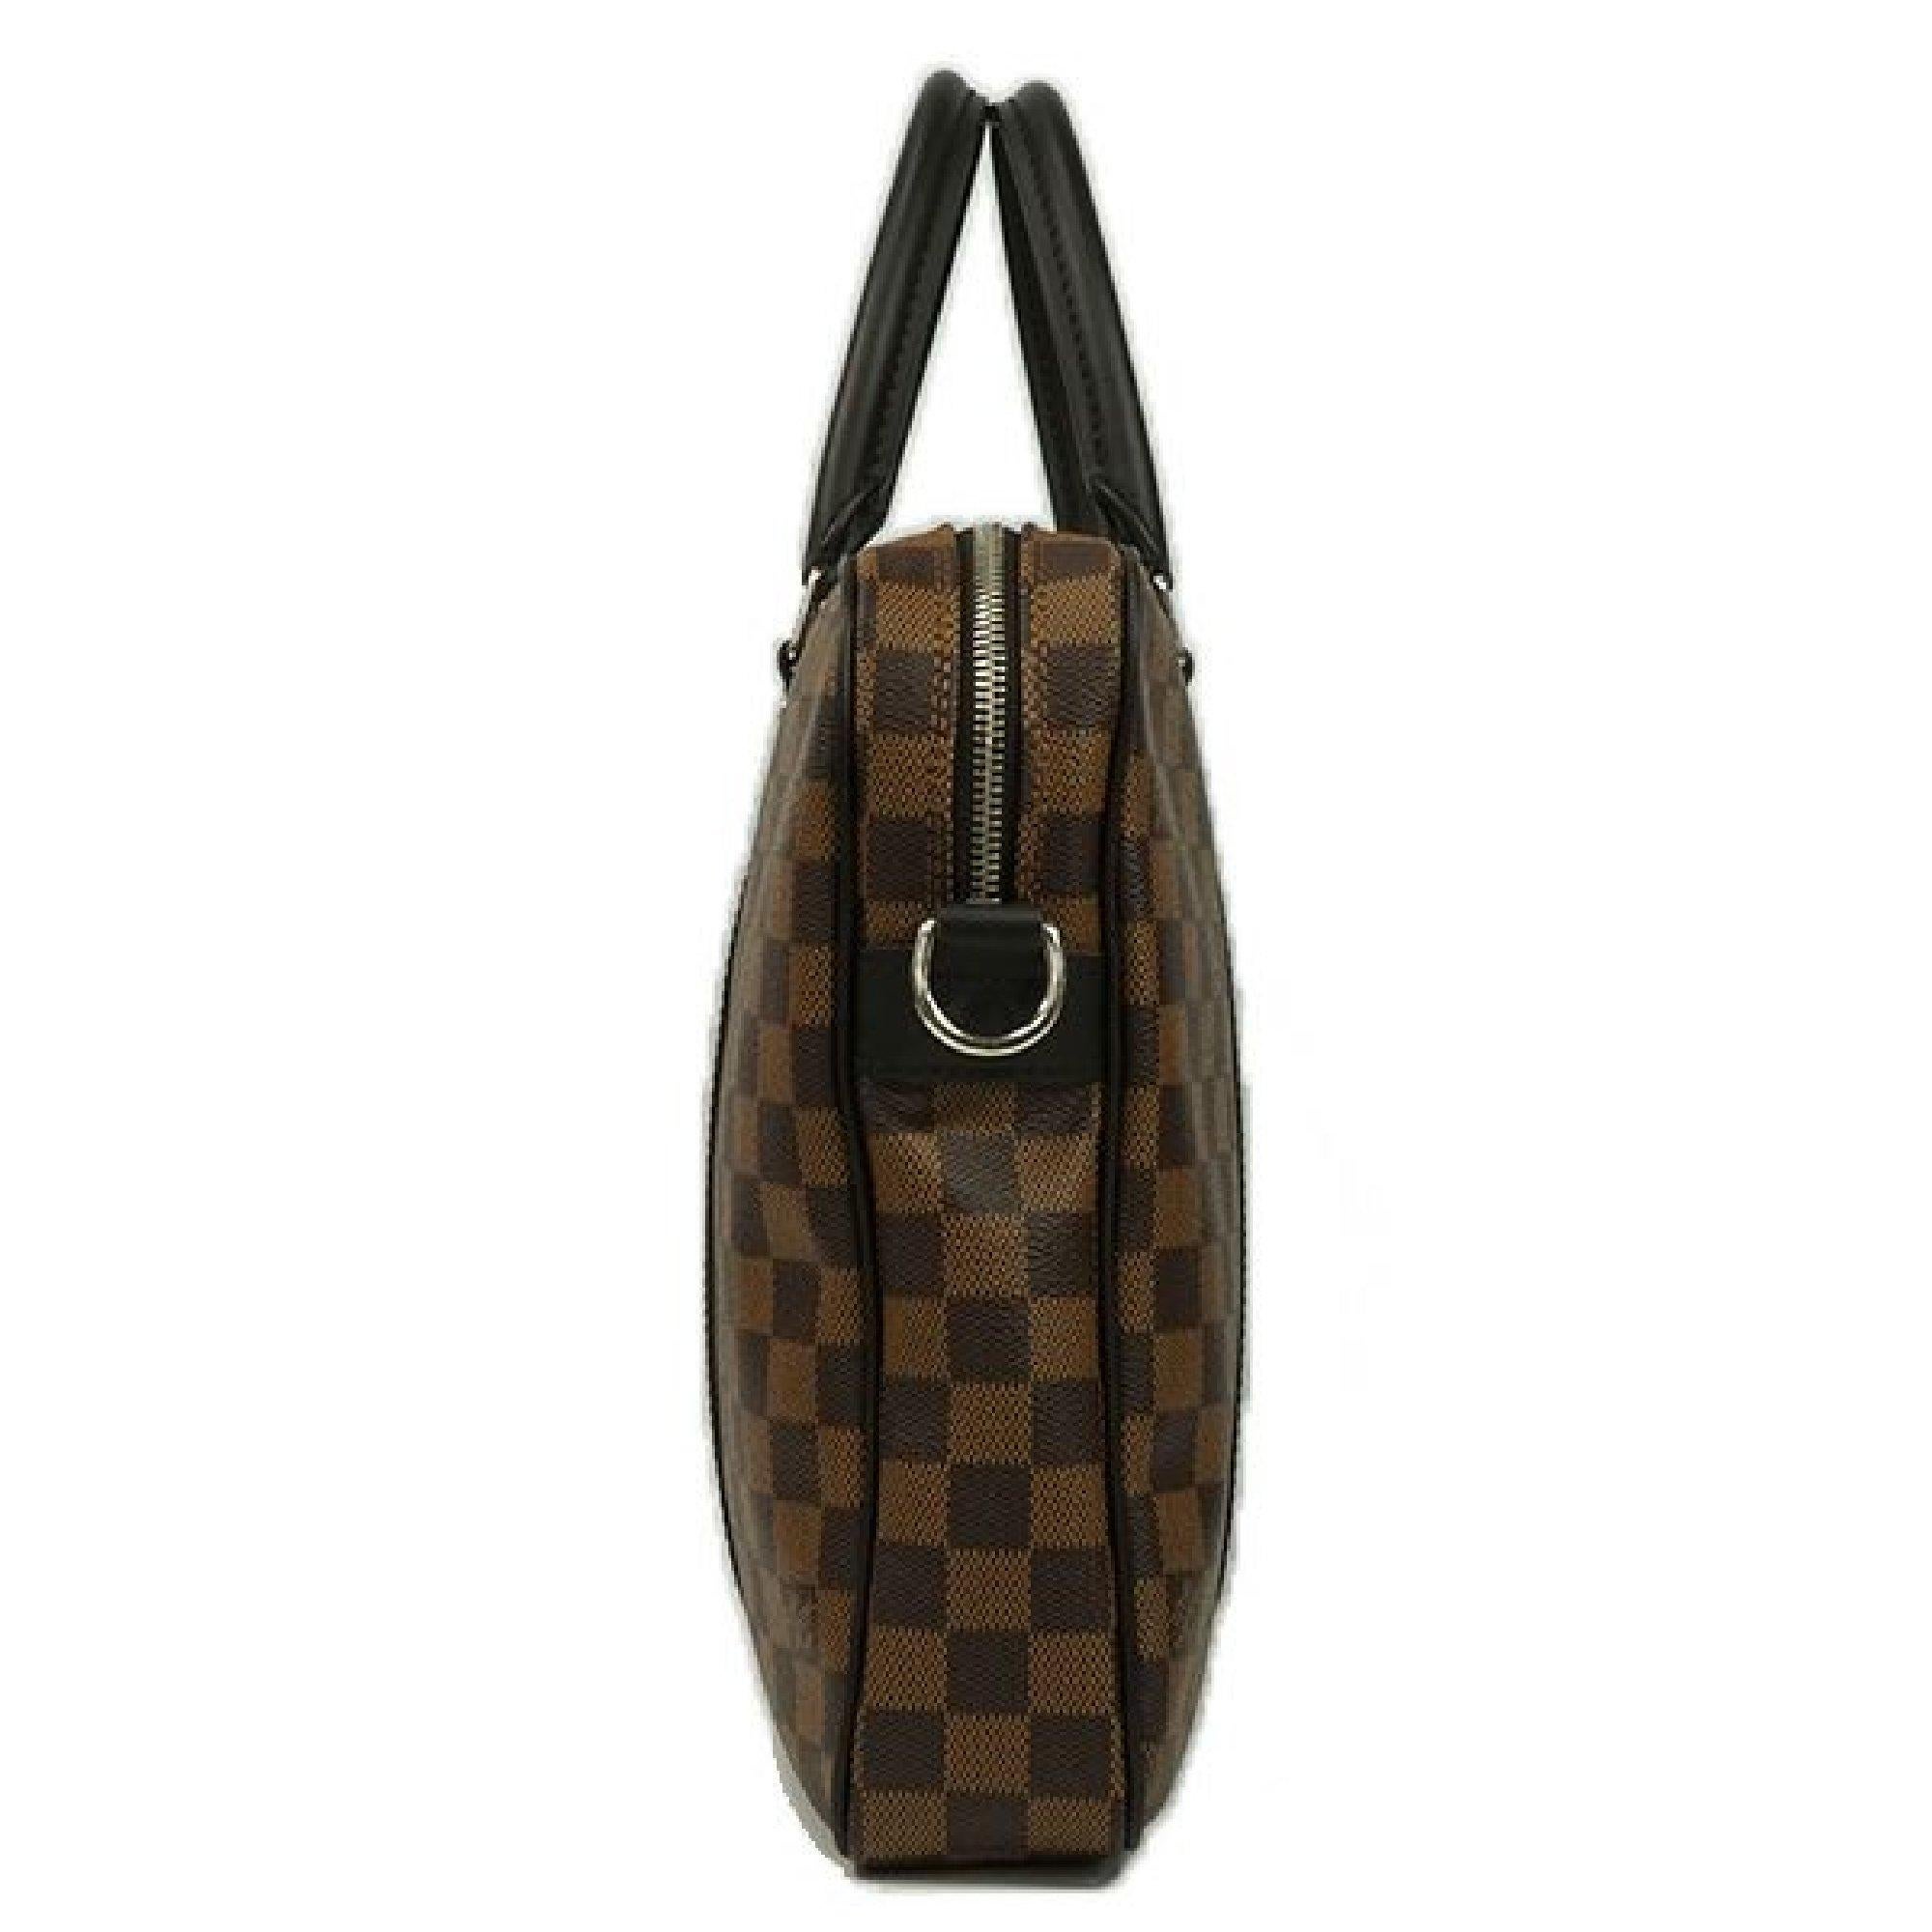 An authentic LOUIS VUITTON PDV PM Mens business bag N41466 The outside material is Damier canvas. The pattern is PDV PM. This item is Contemporary. The year of manufacture would be 2017.
Rank
A Good Condition
There are little bit signs of wear, but